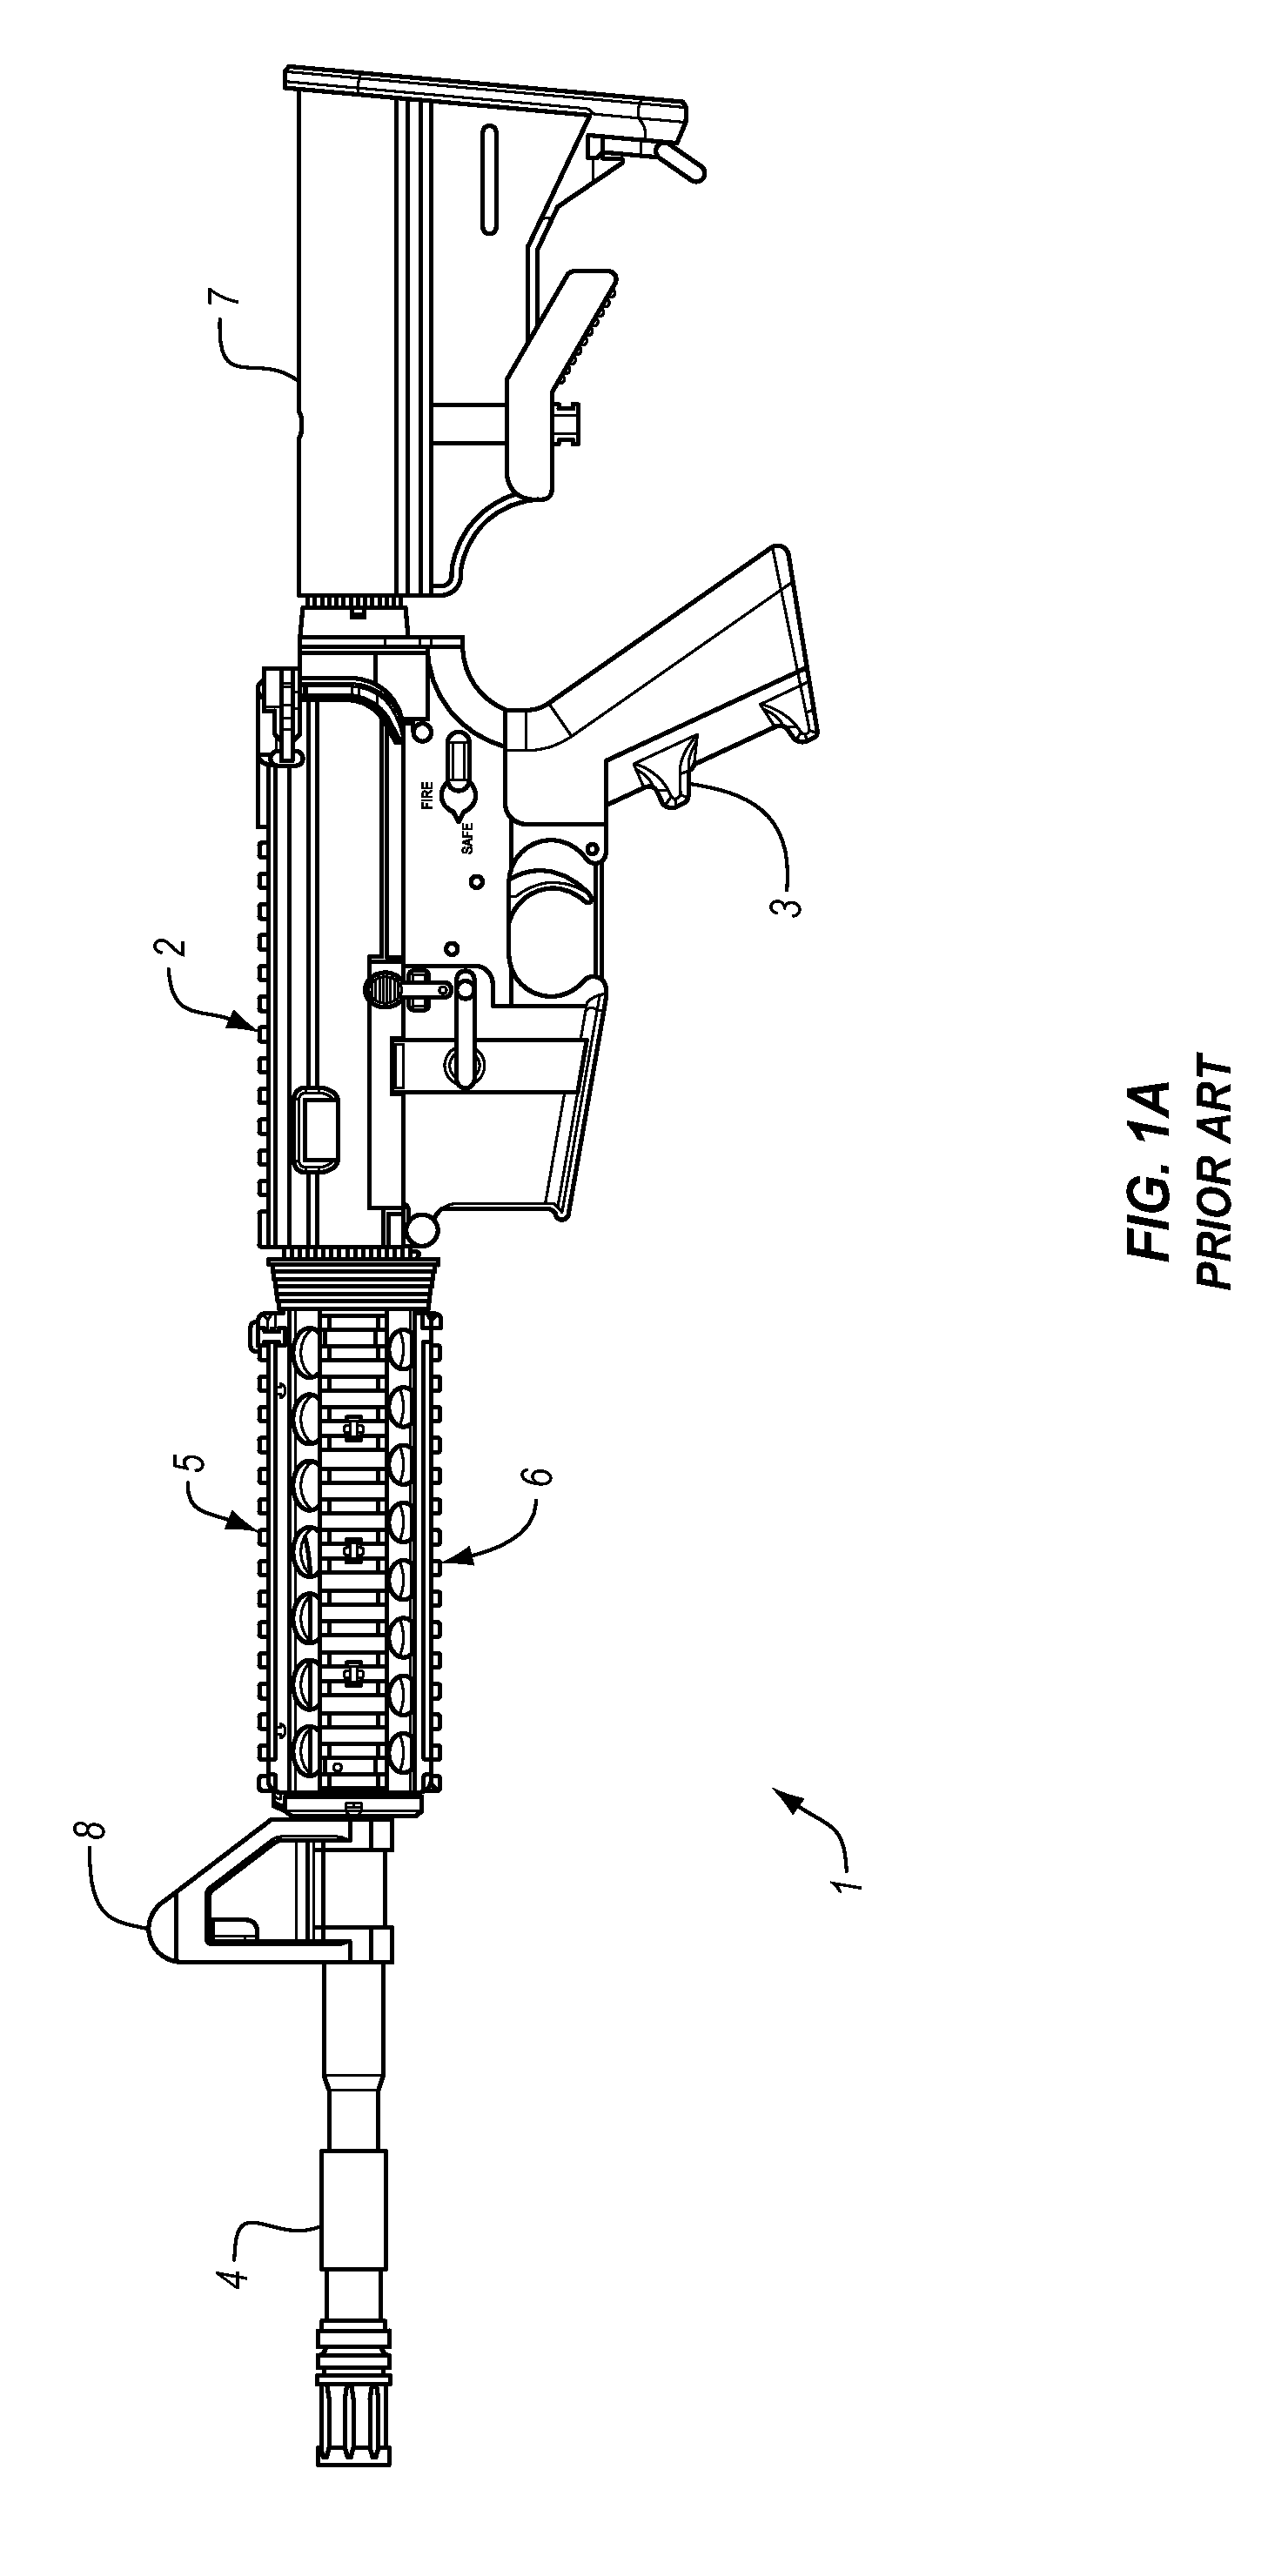 System for providing electrical power to accessories mounted on the powered rail of a weapon